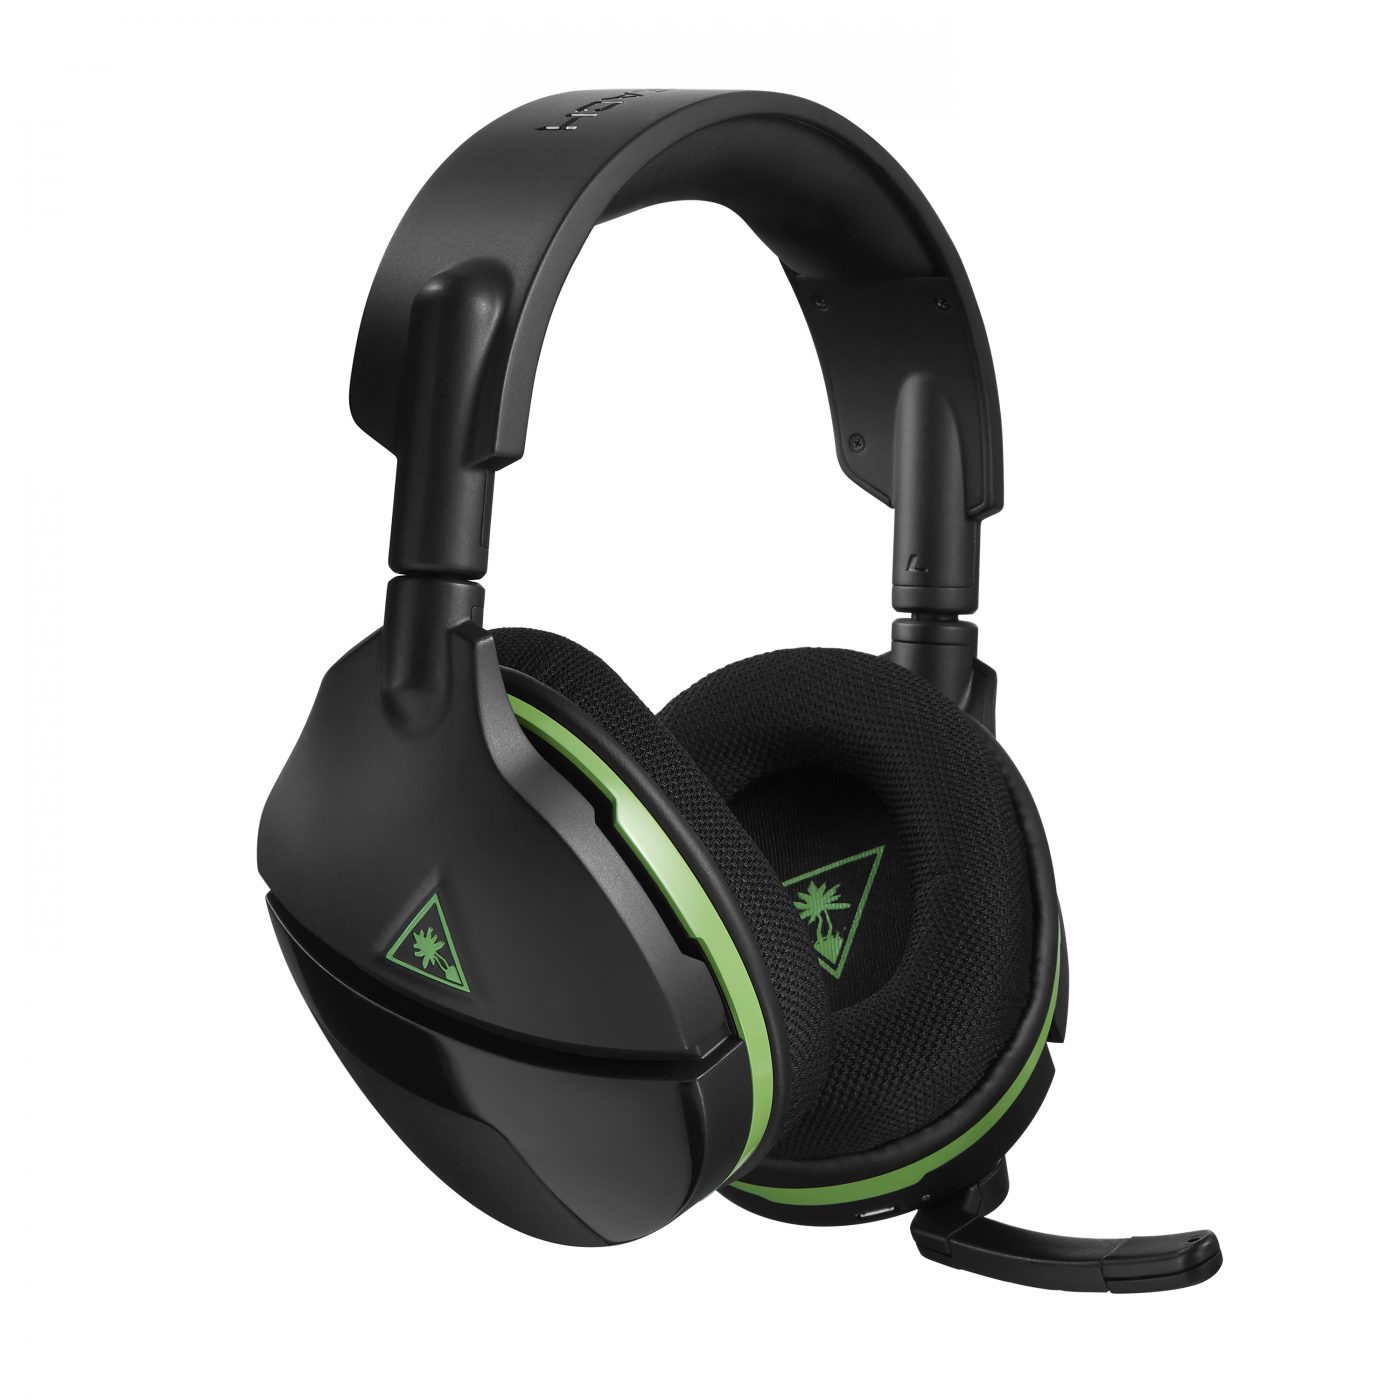 How To Connect Turtle Beach Stealth 600 To Pc Without Adapter